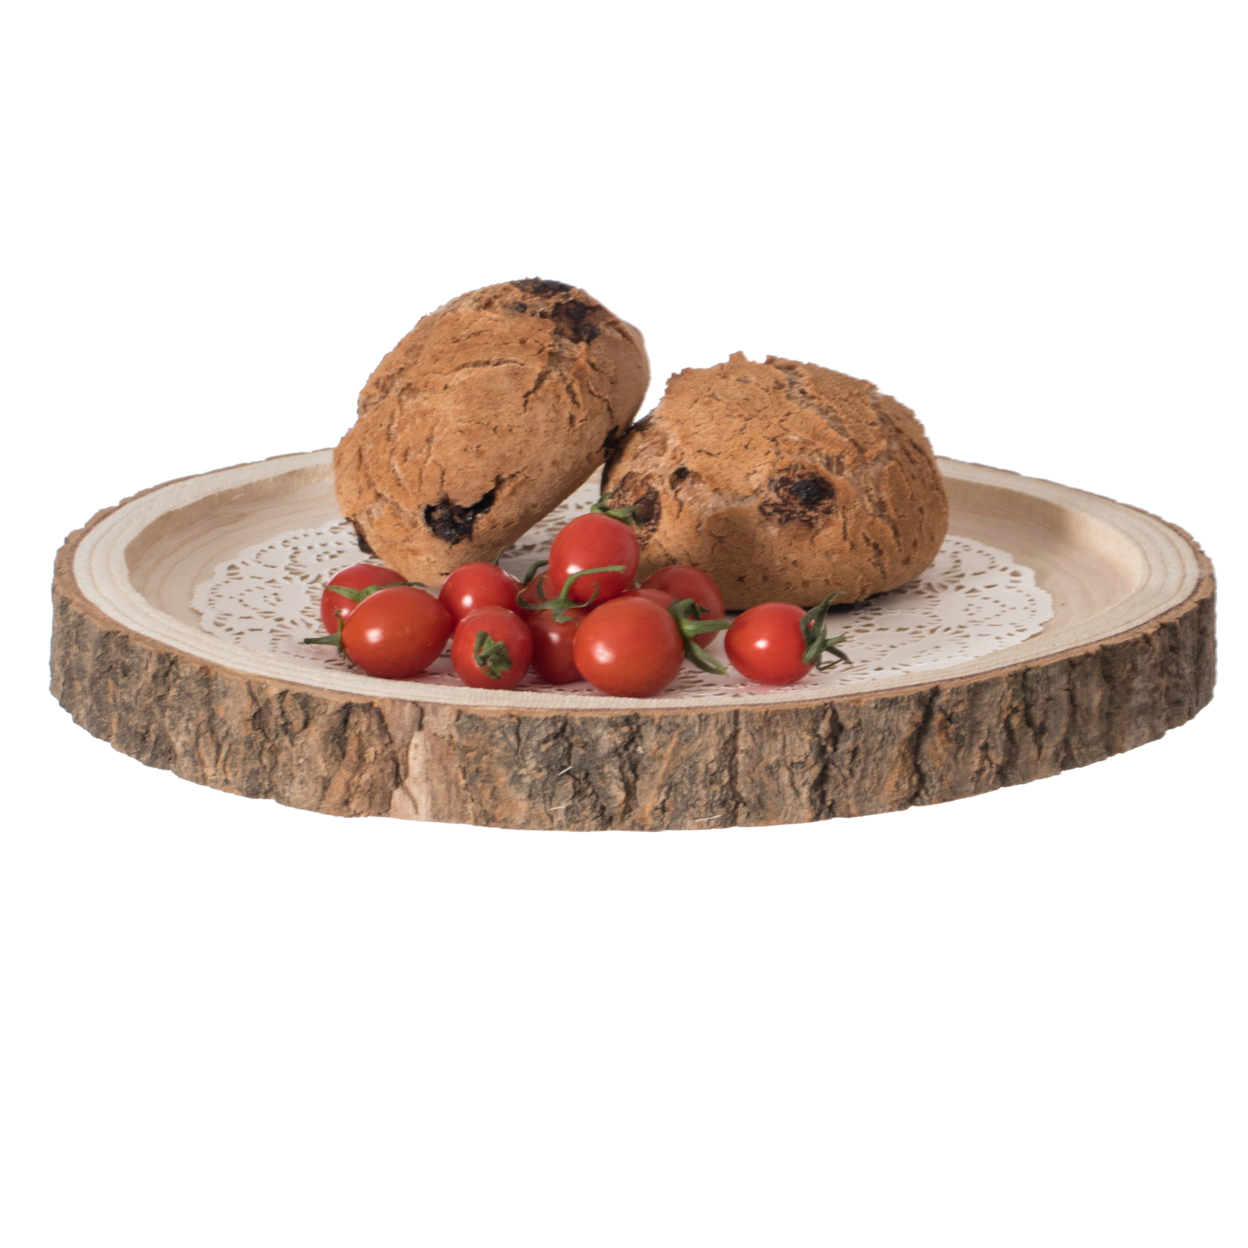 Natural Wooden Bark Round Slice Tray, Rustic Table Charger Centerpiece - 14